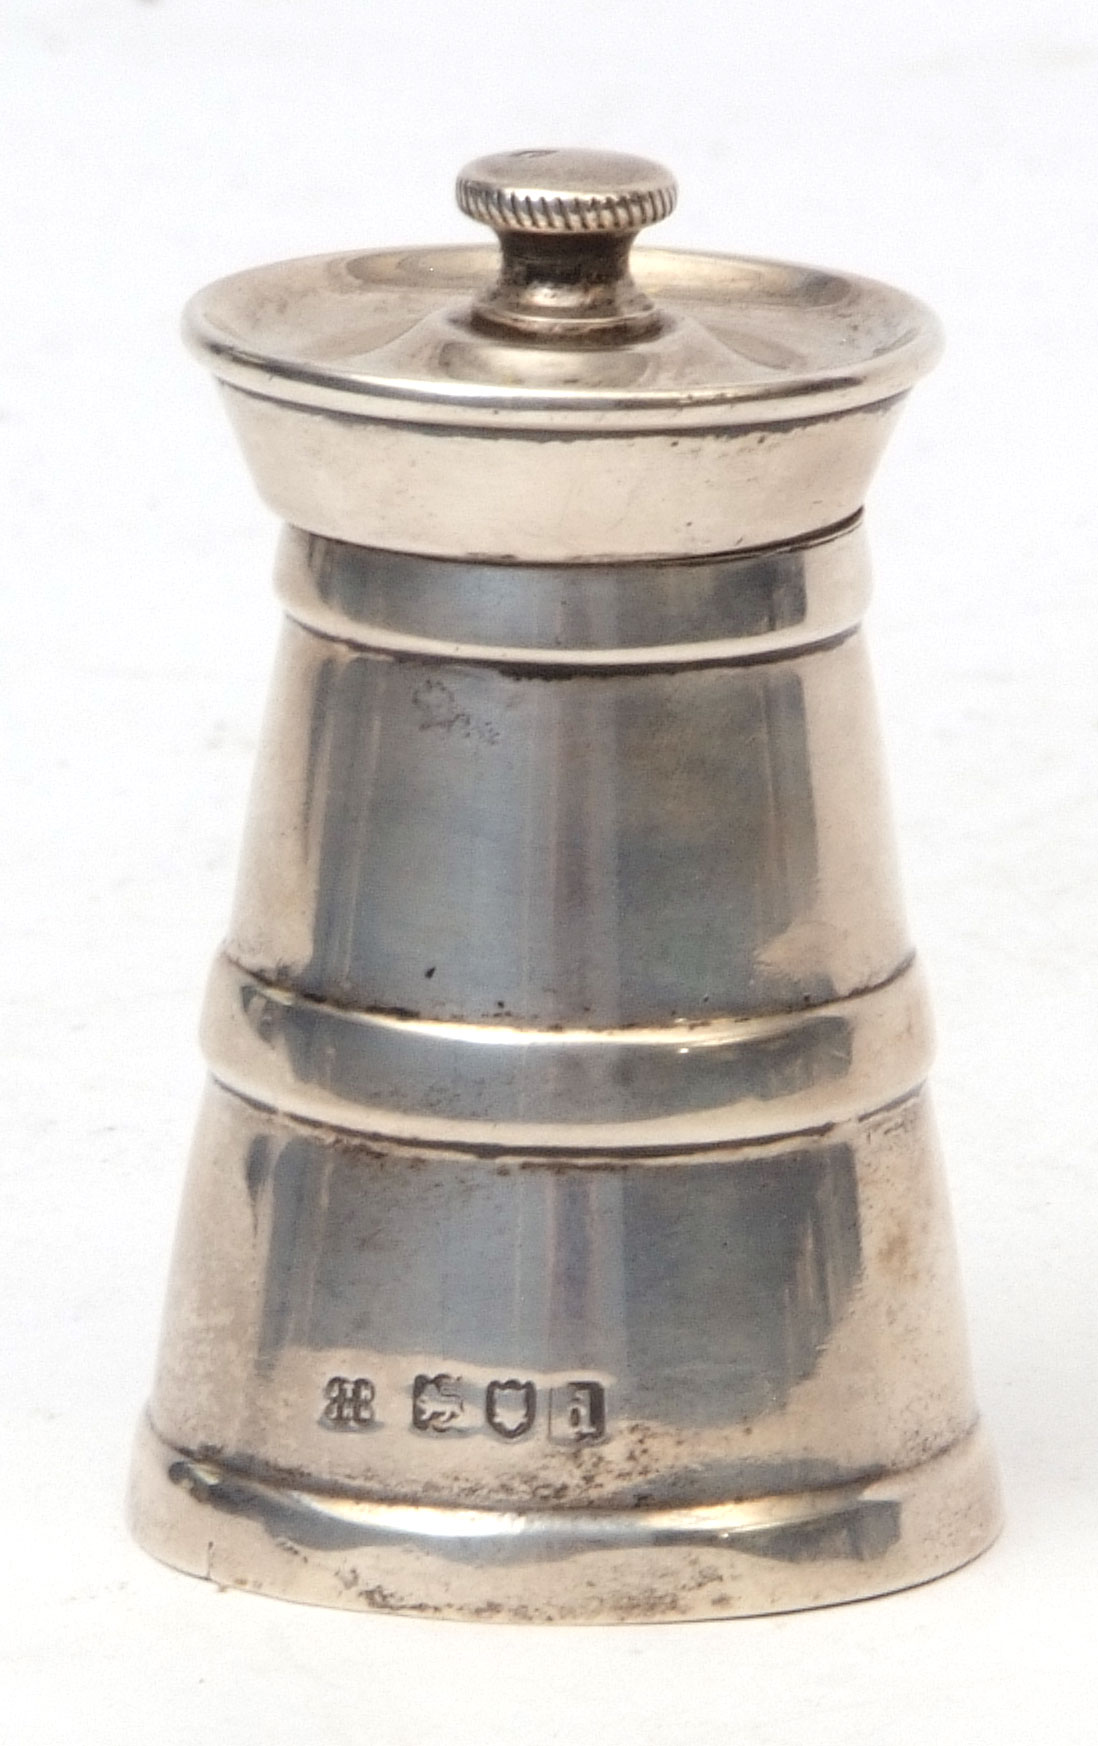 Late Victorian pepper grinder modelled in the form of a milk churn, with banded body and fitted